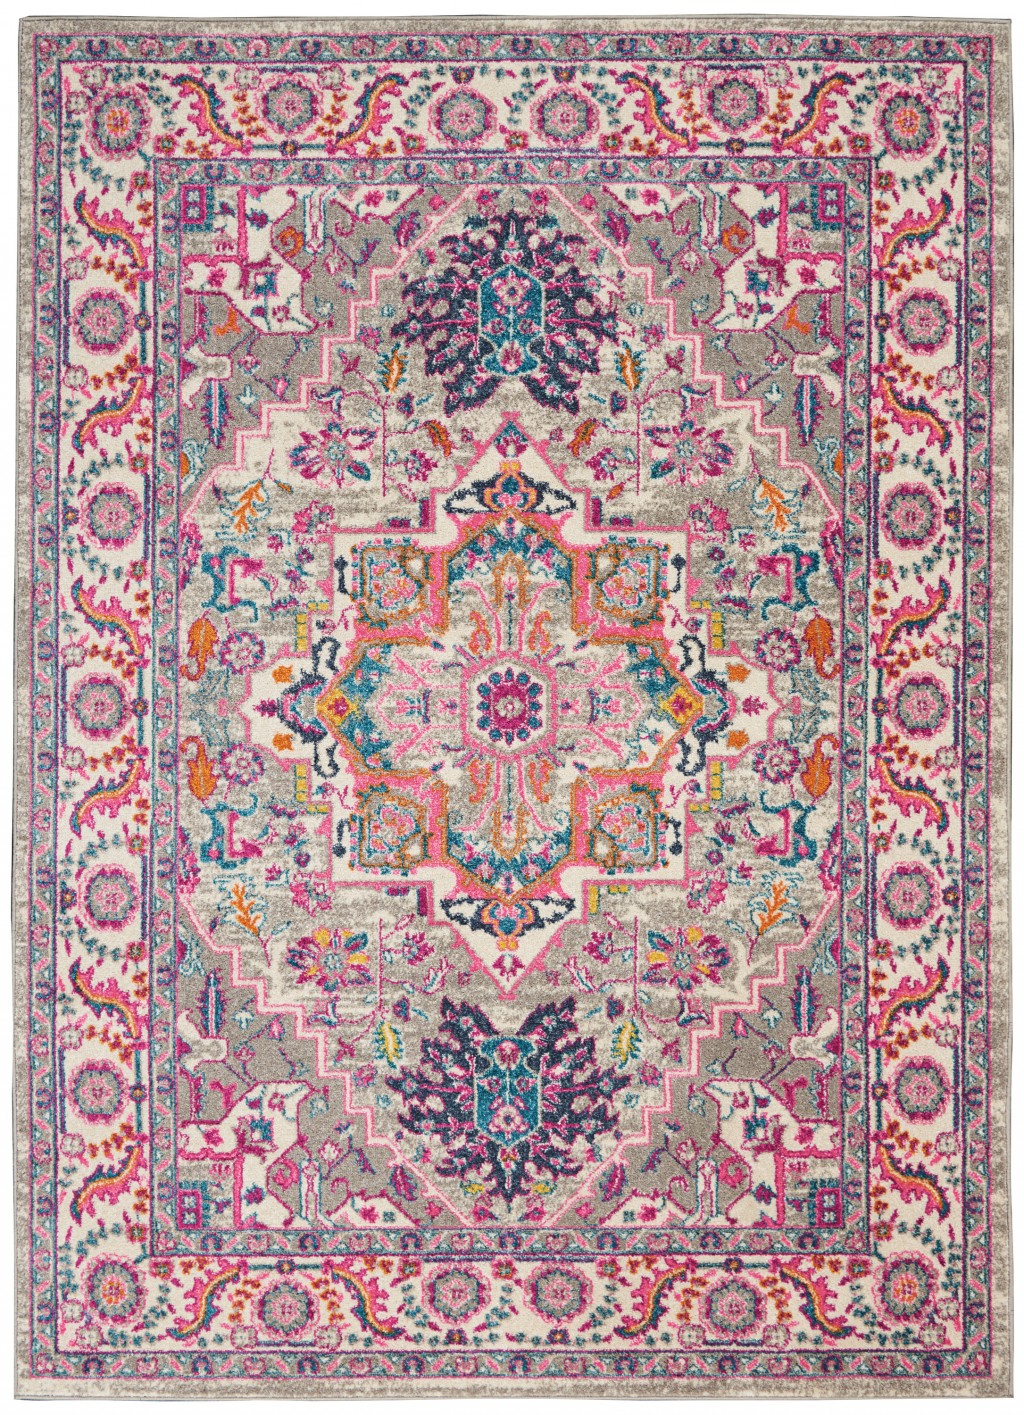 5' X 7' Pink And Gray Power Loom Area Rug-385496-1